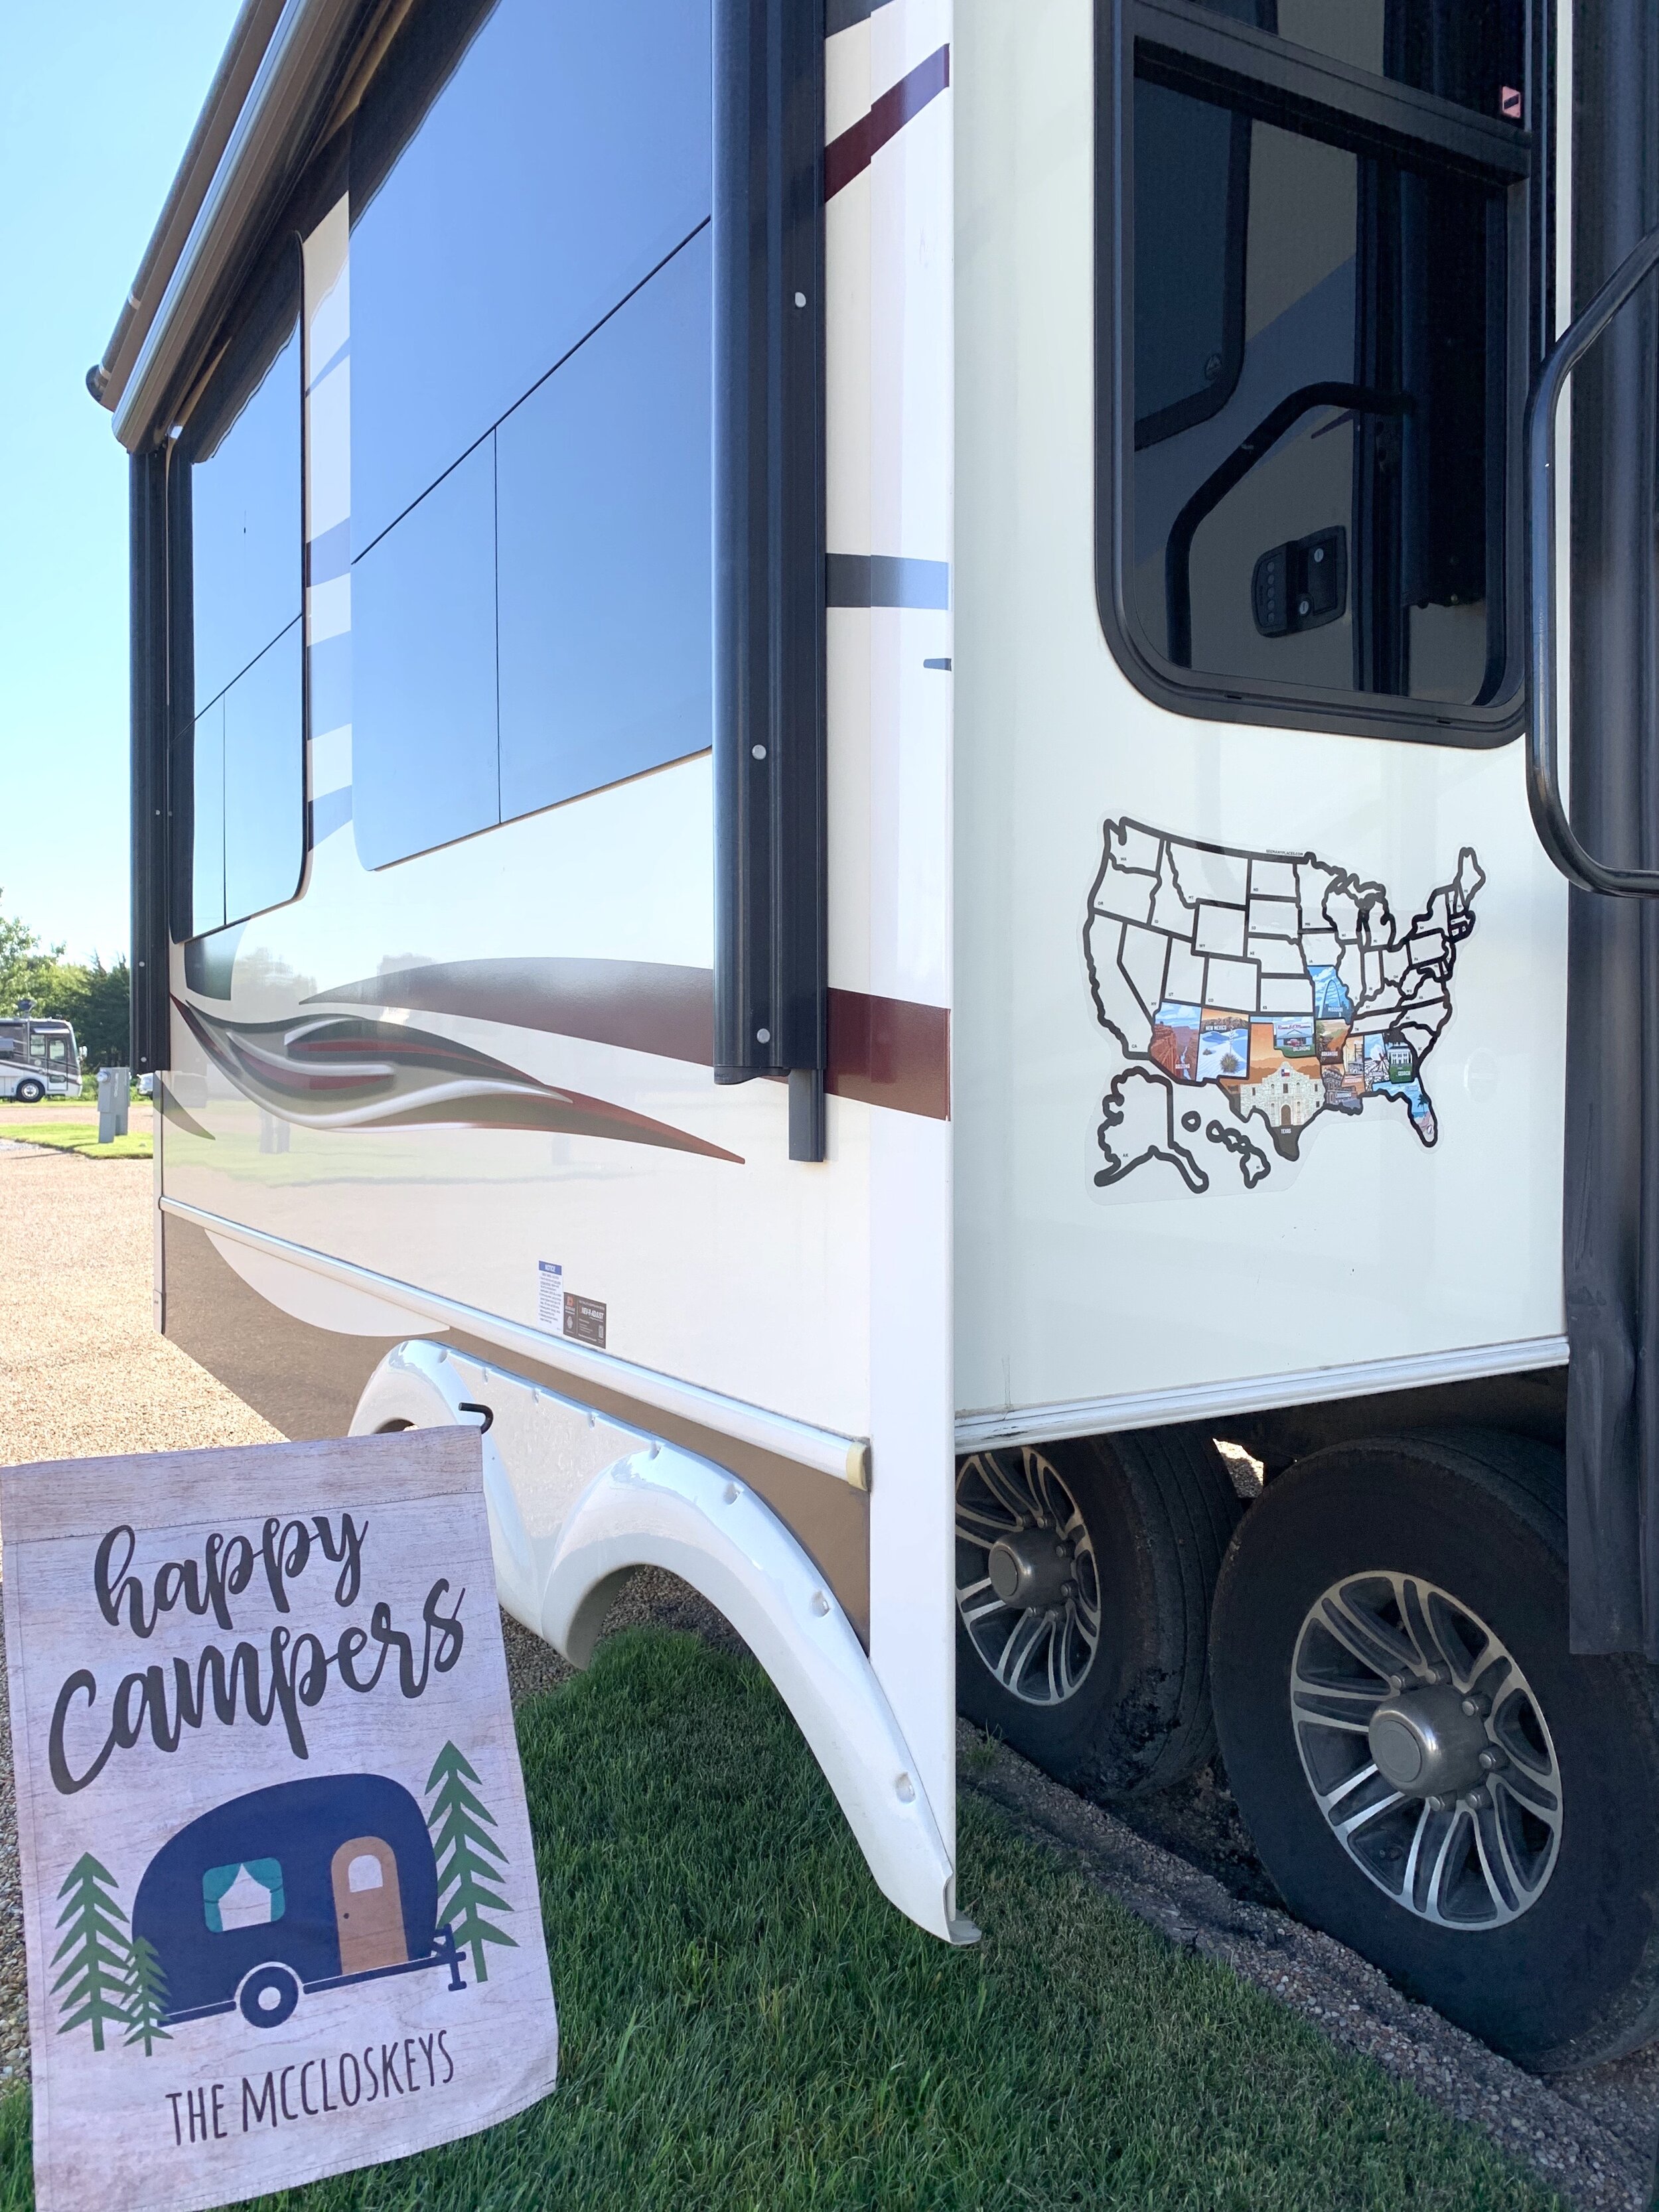  After setting up camp a time or two, it felt like we hadn’t missed a beat with our travels! 🚎 